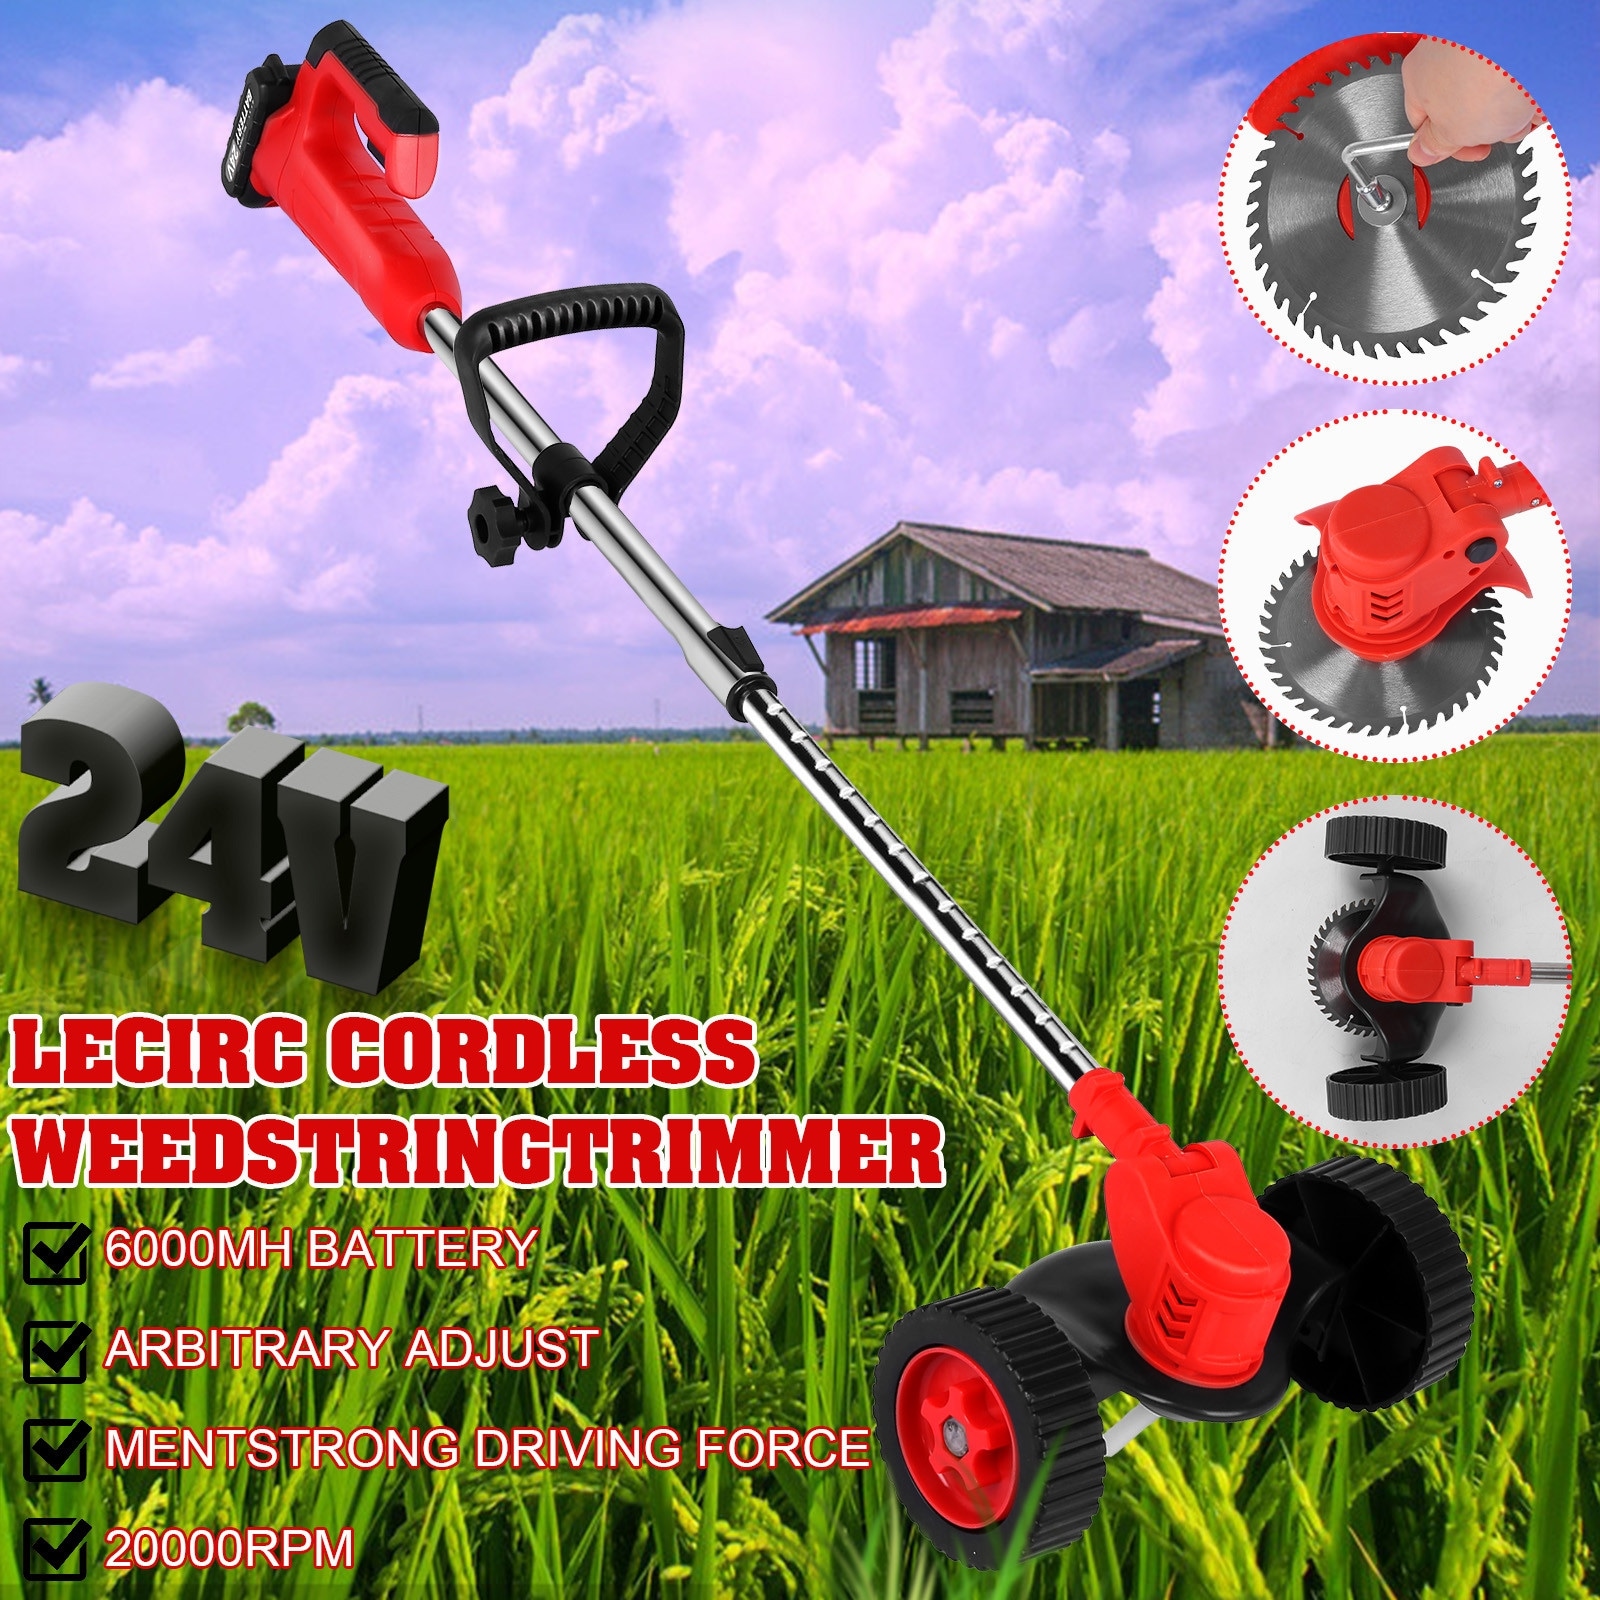 Cordless String Grass T-rimmer Weed Eater With 24V Lithium-ion 2